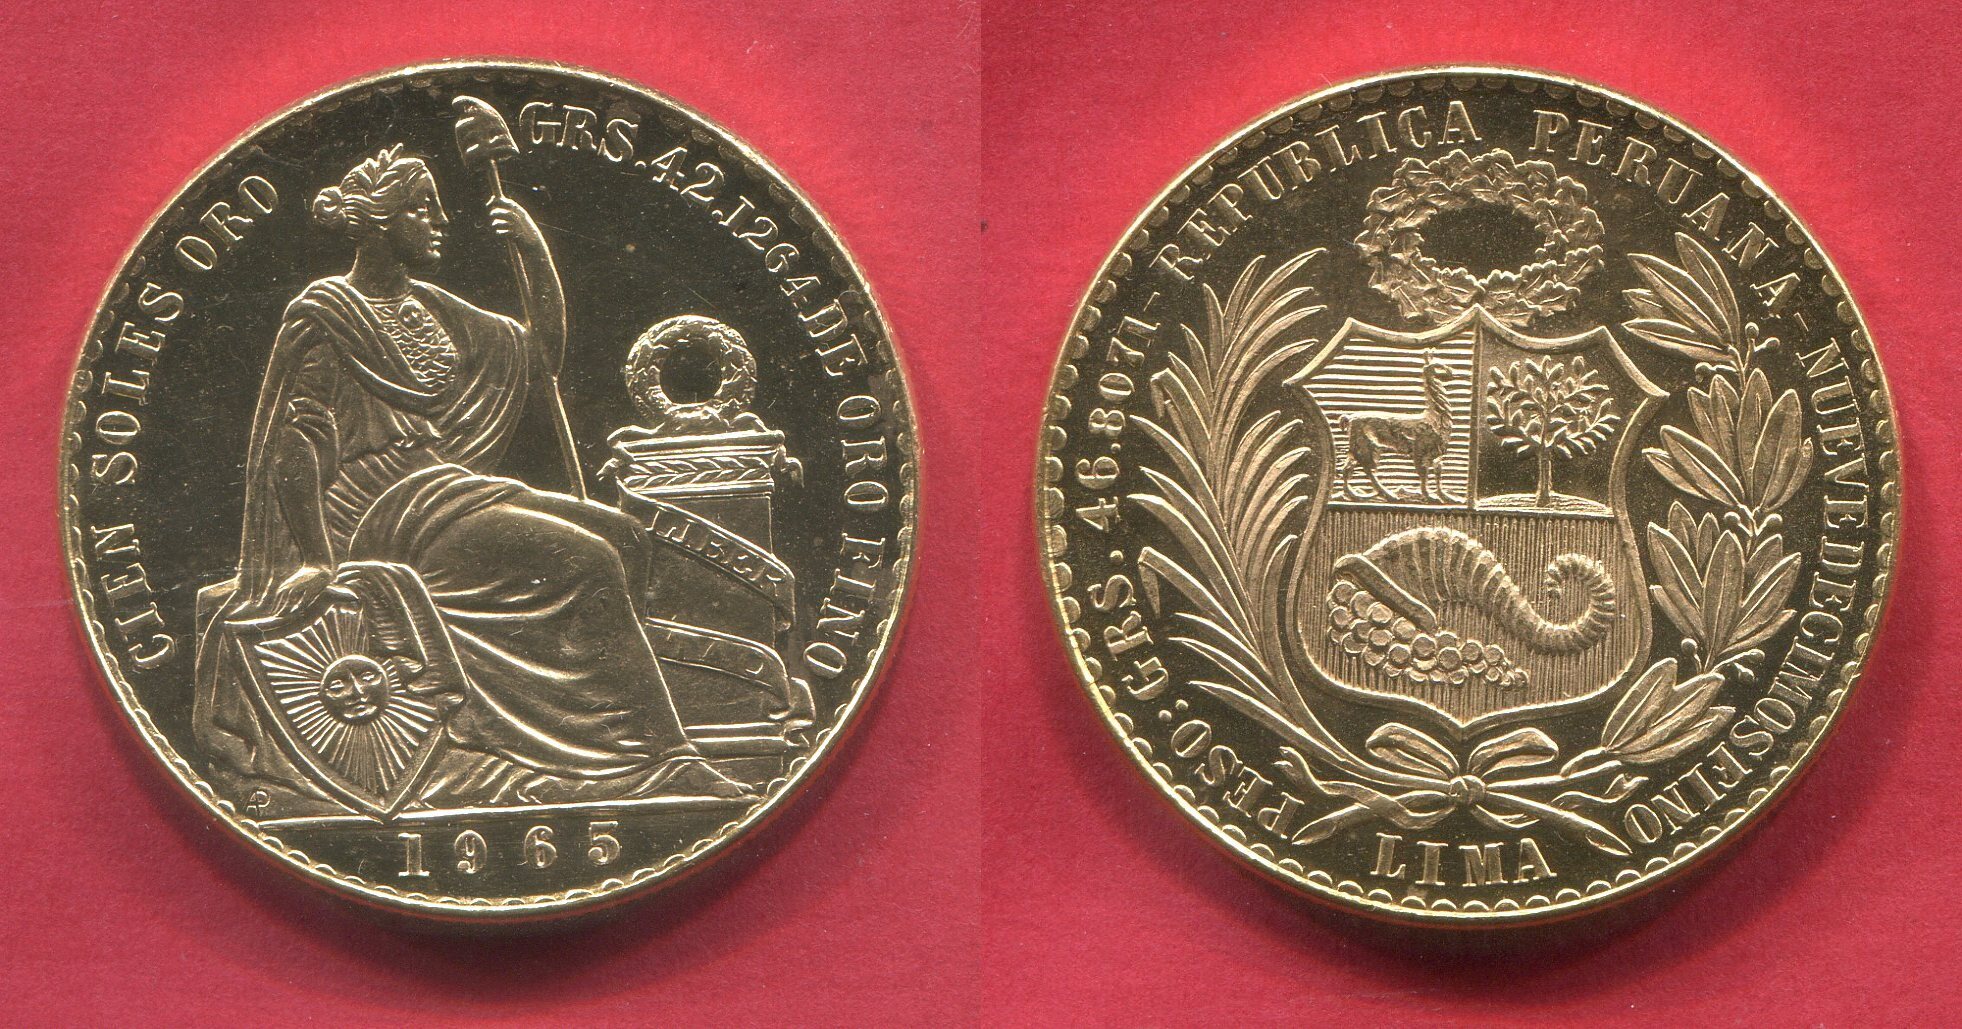 Peru 100 Soles 1965 Seated Liberty flanked by shield and column